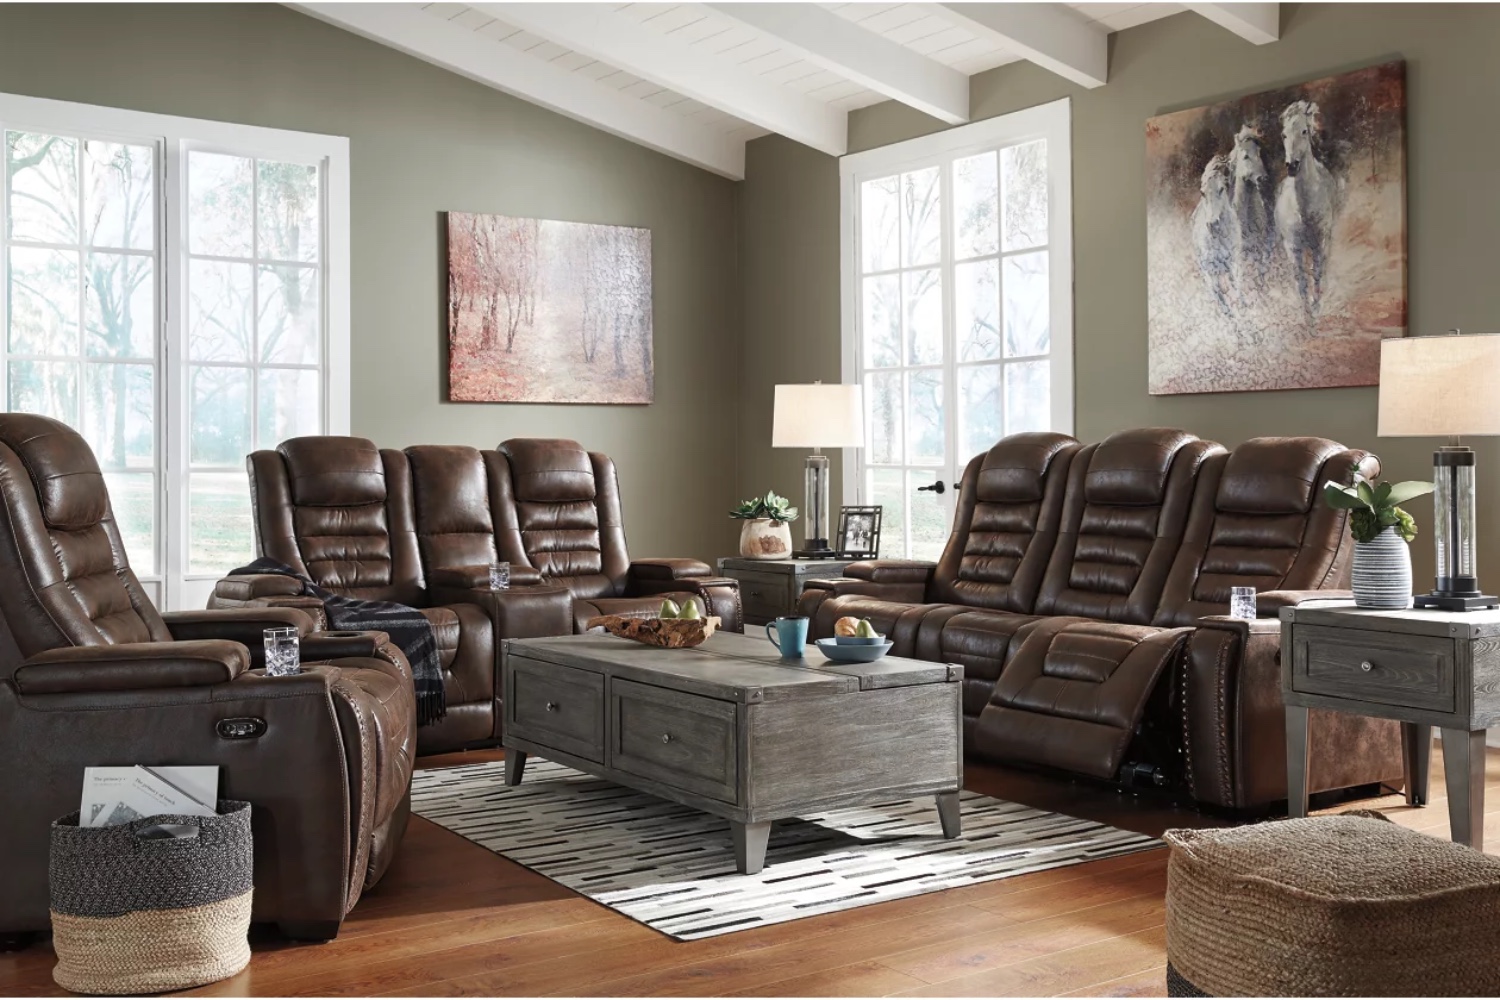 The Best Power Recliners Options